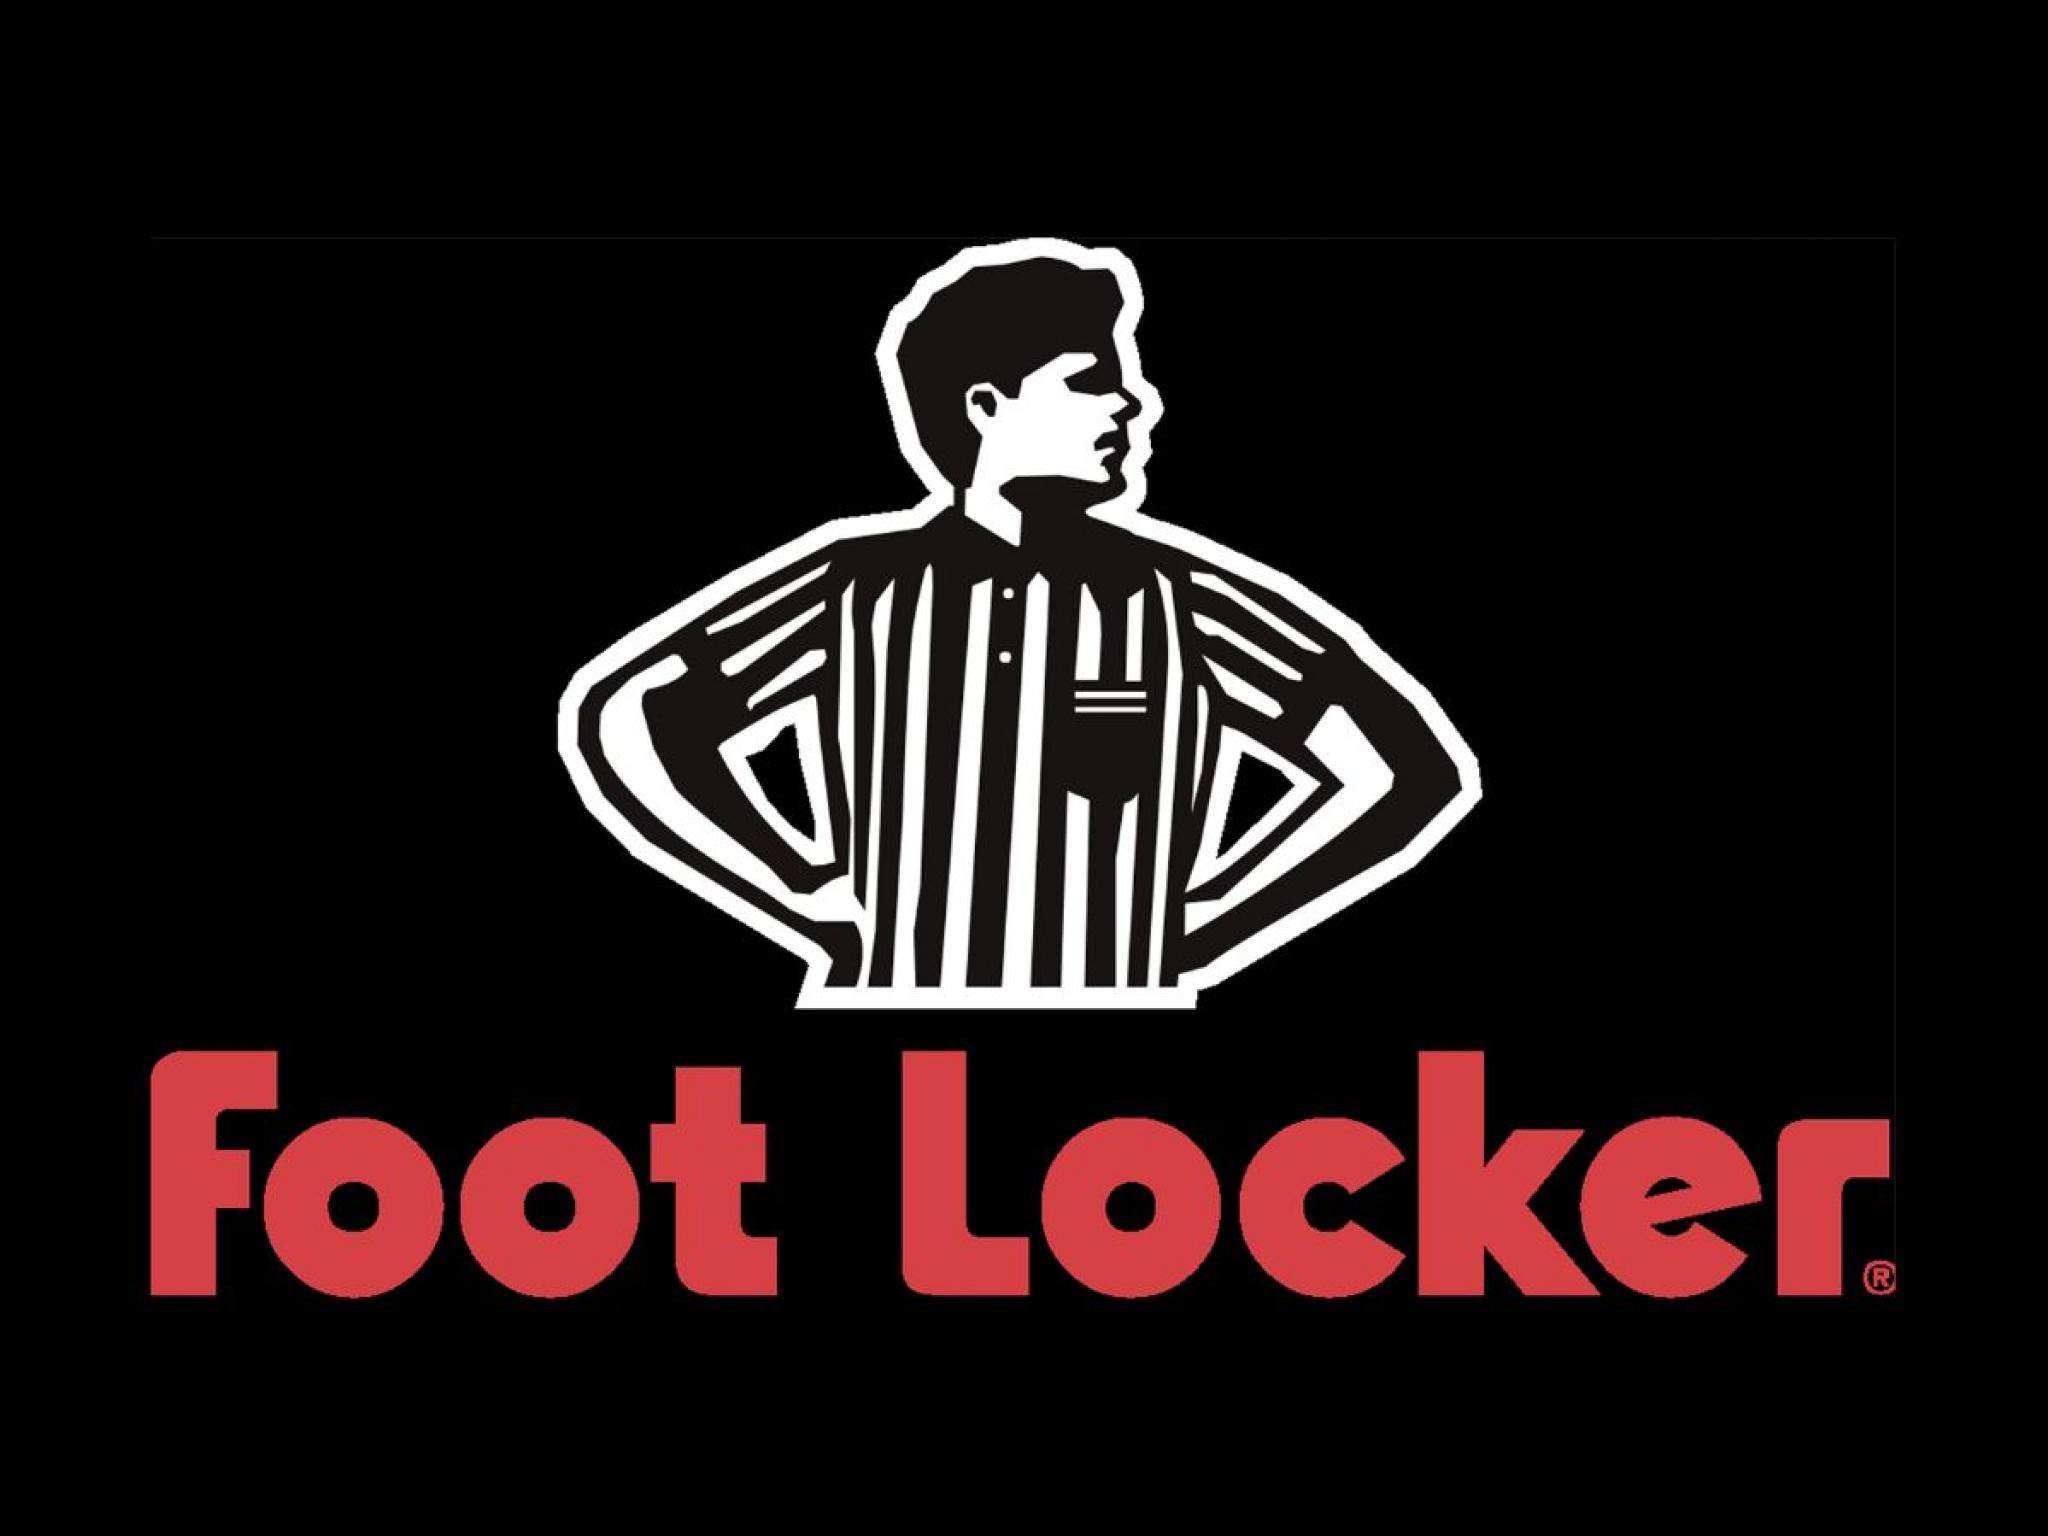  insiders-buying-foot-locker-and-2-other-stocks 